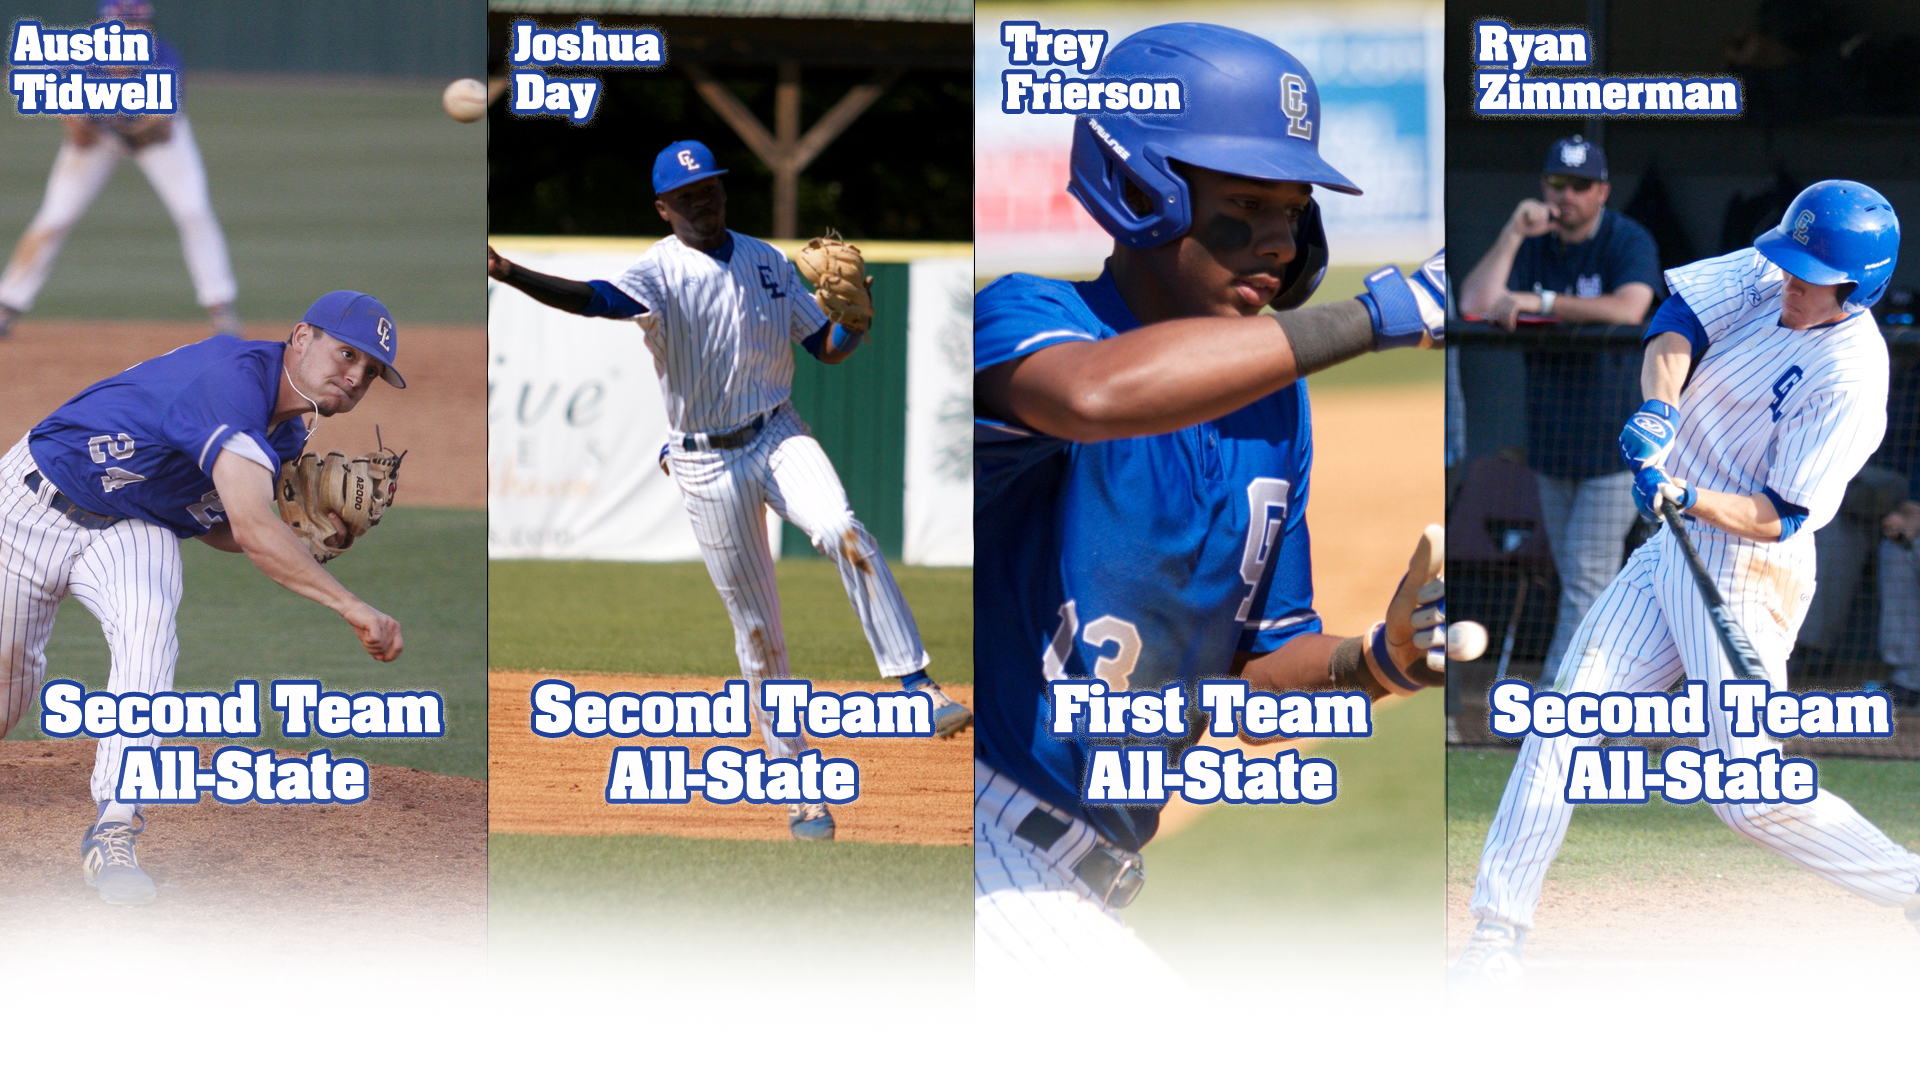 Frierson, Day, Tidwell, and Zimmerman earn post-season honors